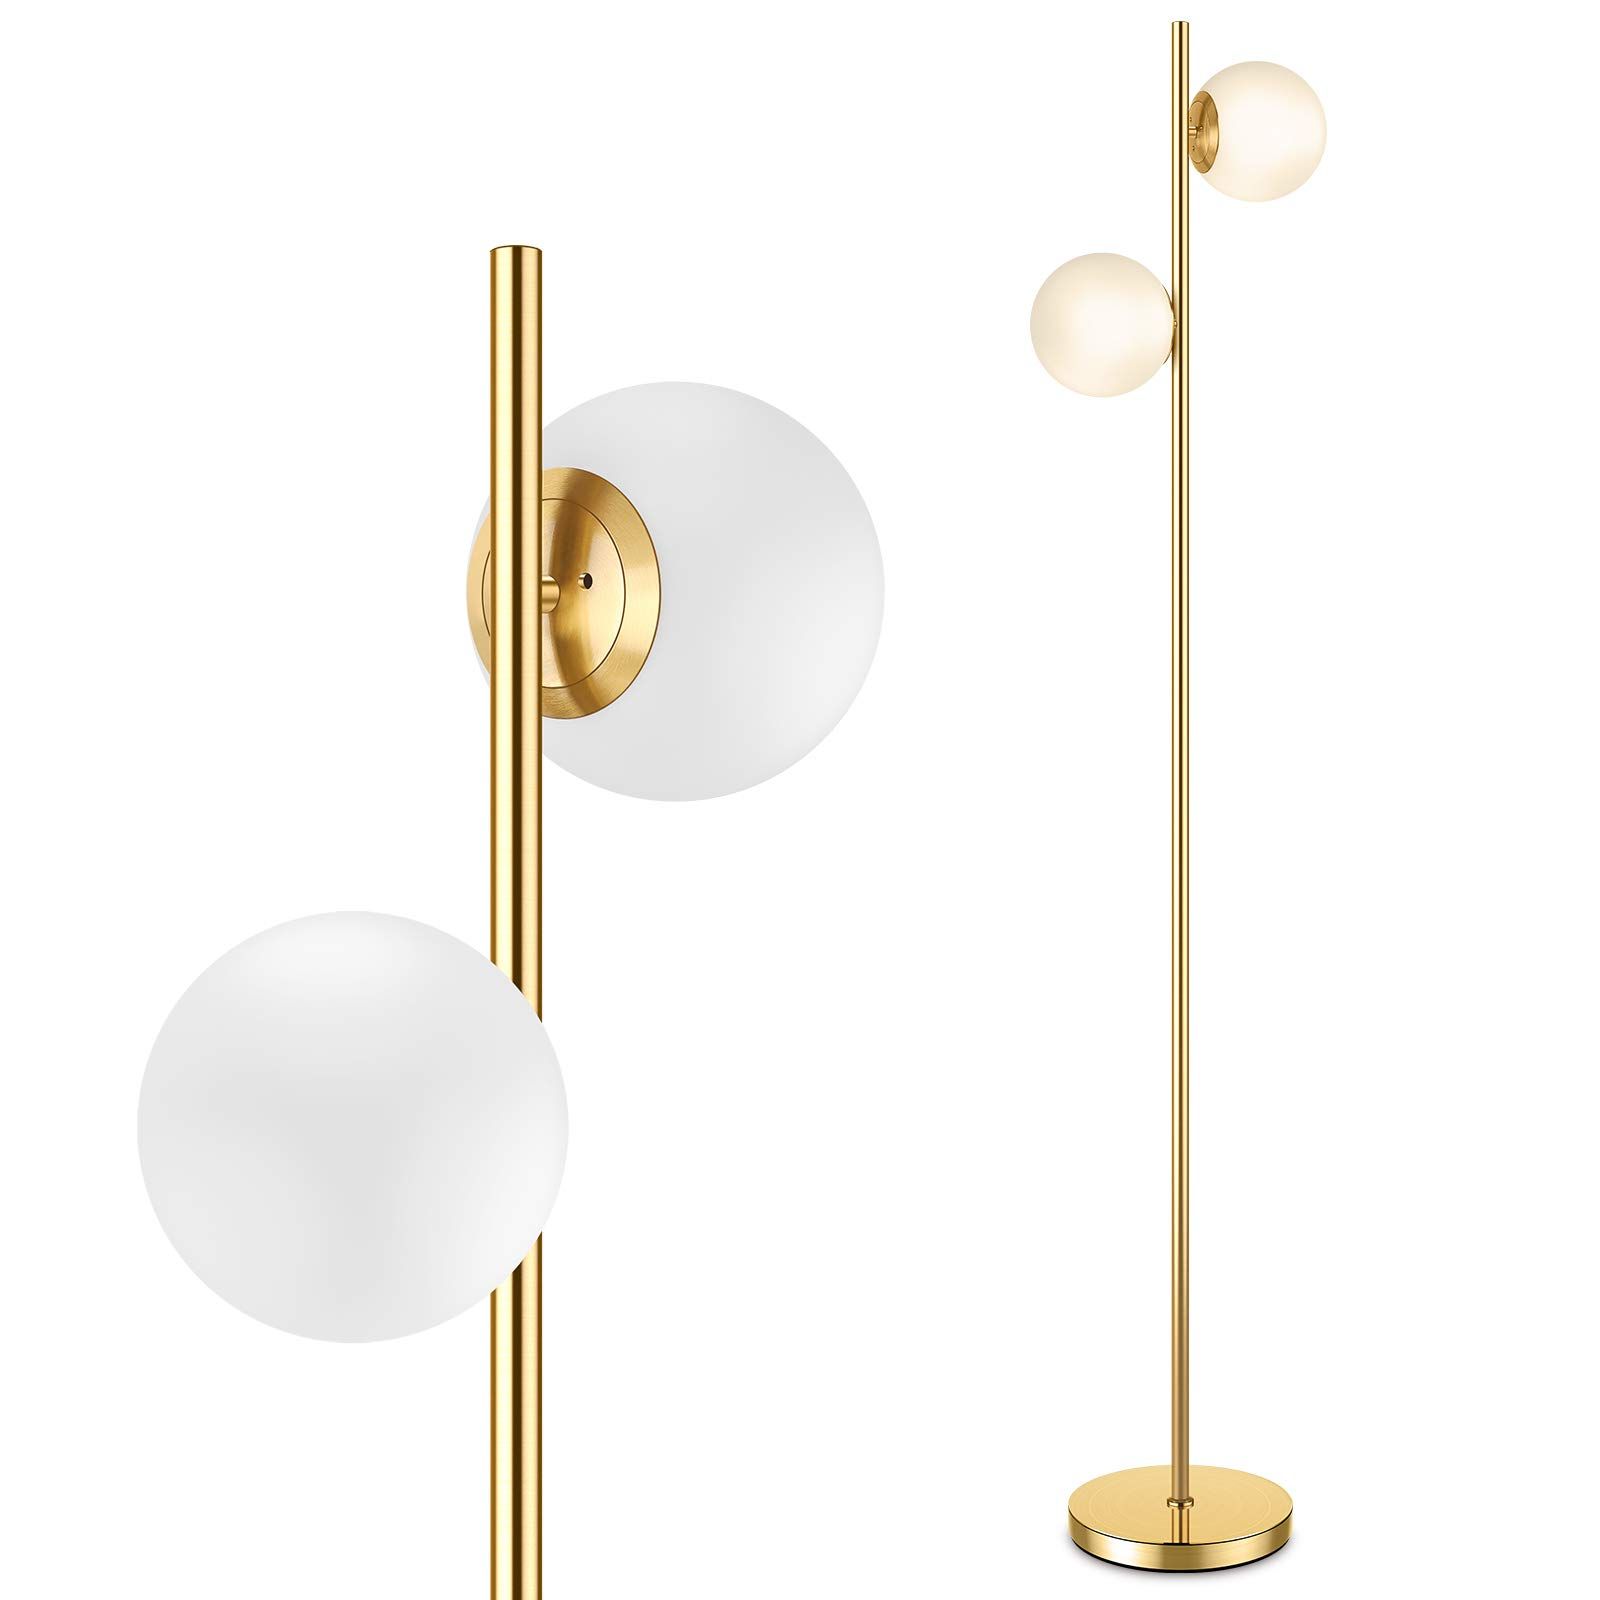 Globe Standing Lamps With Most Recently Released Mid Century Modern 2 Frosted Glass Globe Floor Lamp For Living  Room,contemporary Led Standing Light, Gold Corner Pole Lamp For Office  Bedroom, Study Room, Hotel, Antique Brass Standing Lighting – – Amazon (View 1 of 10)